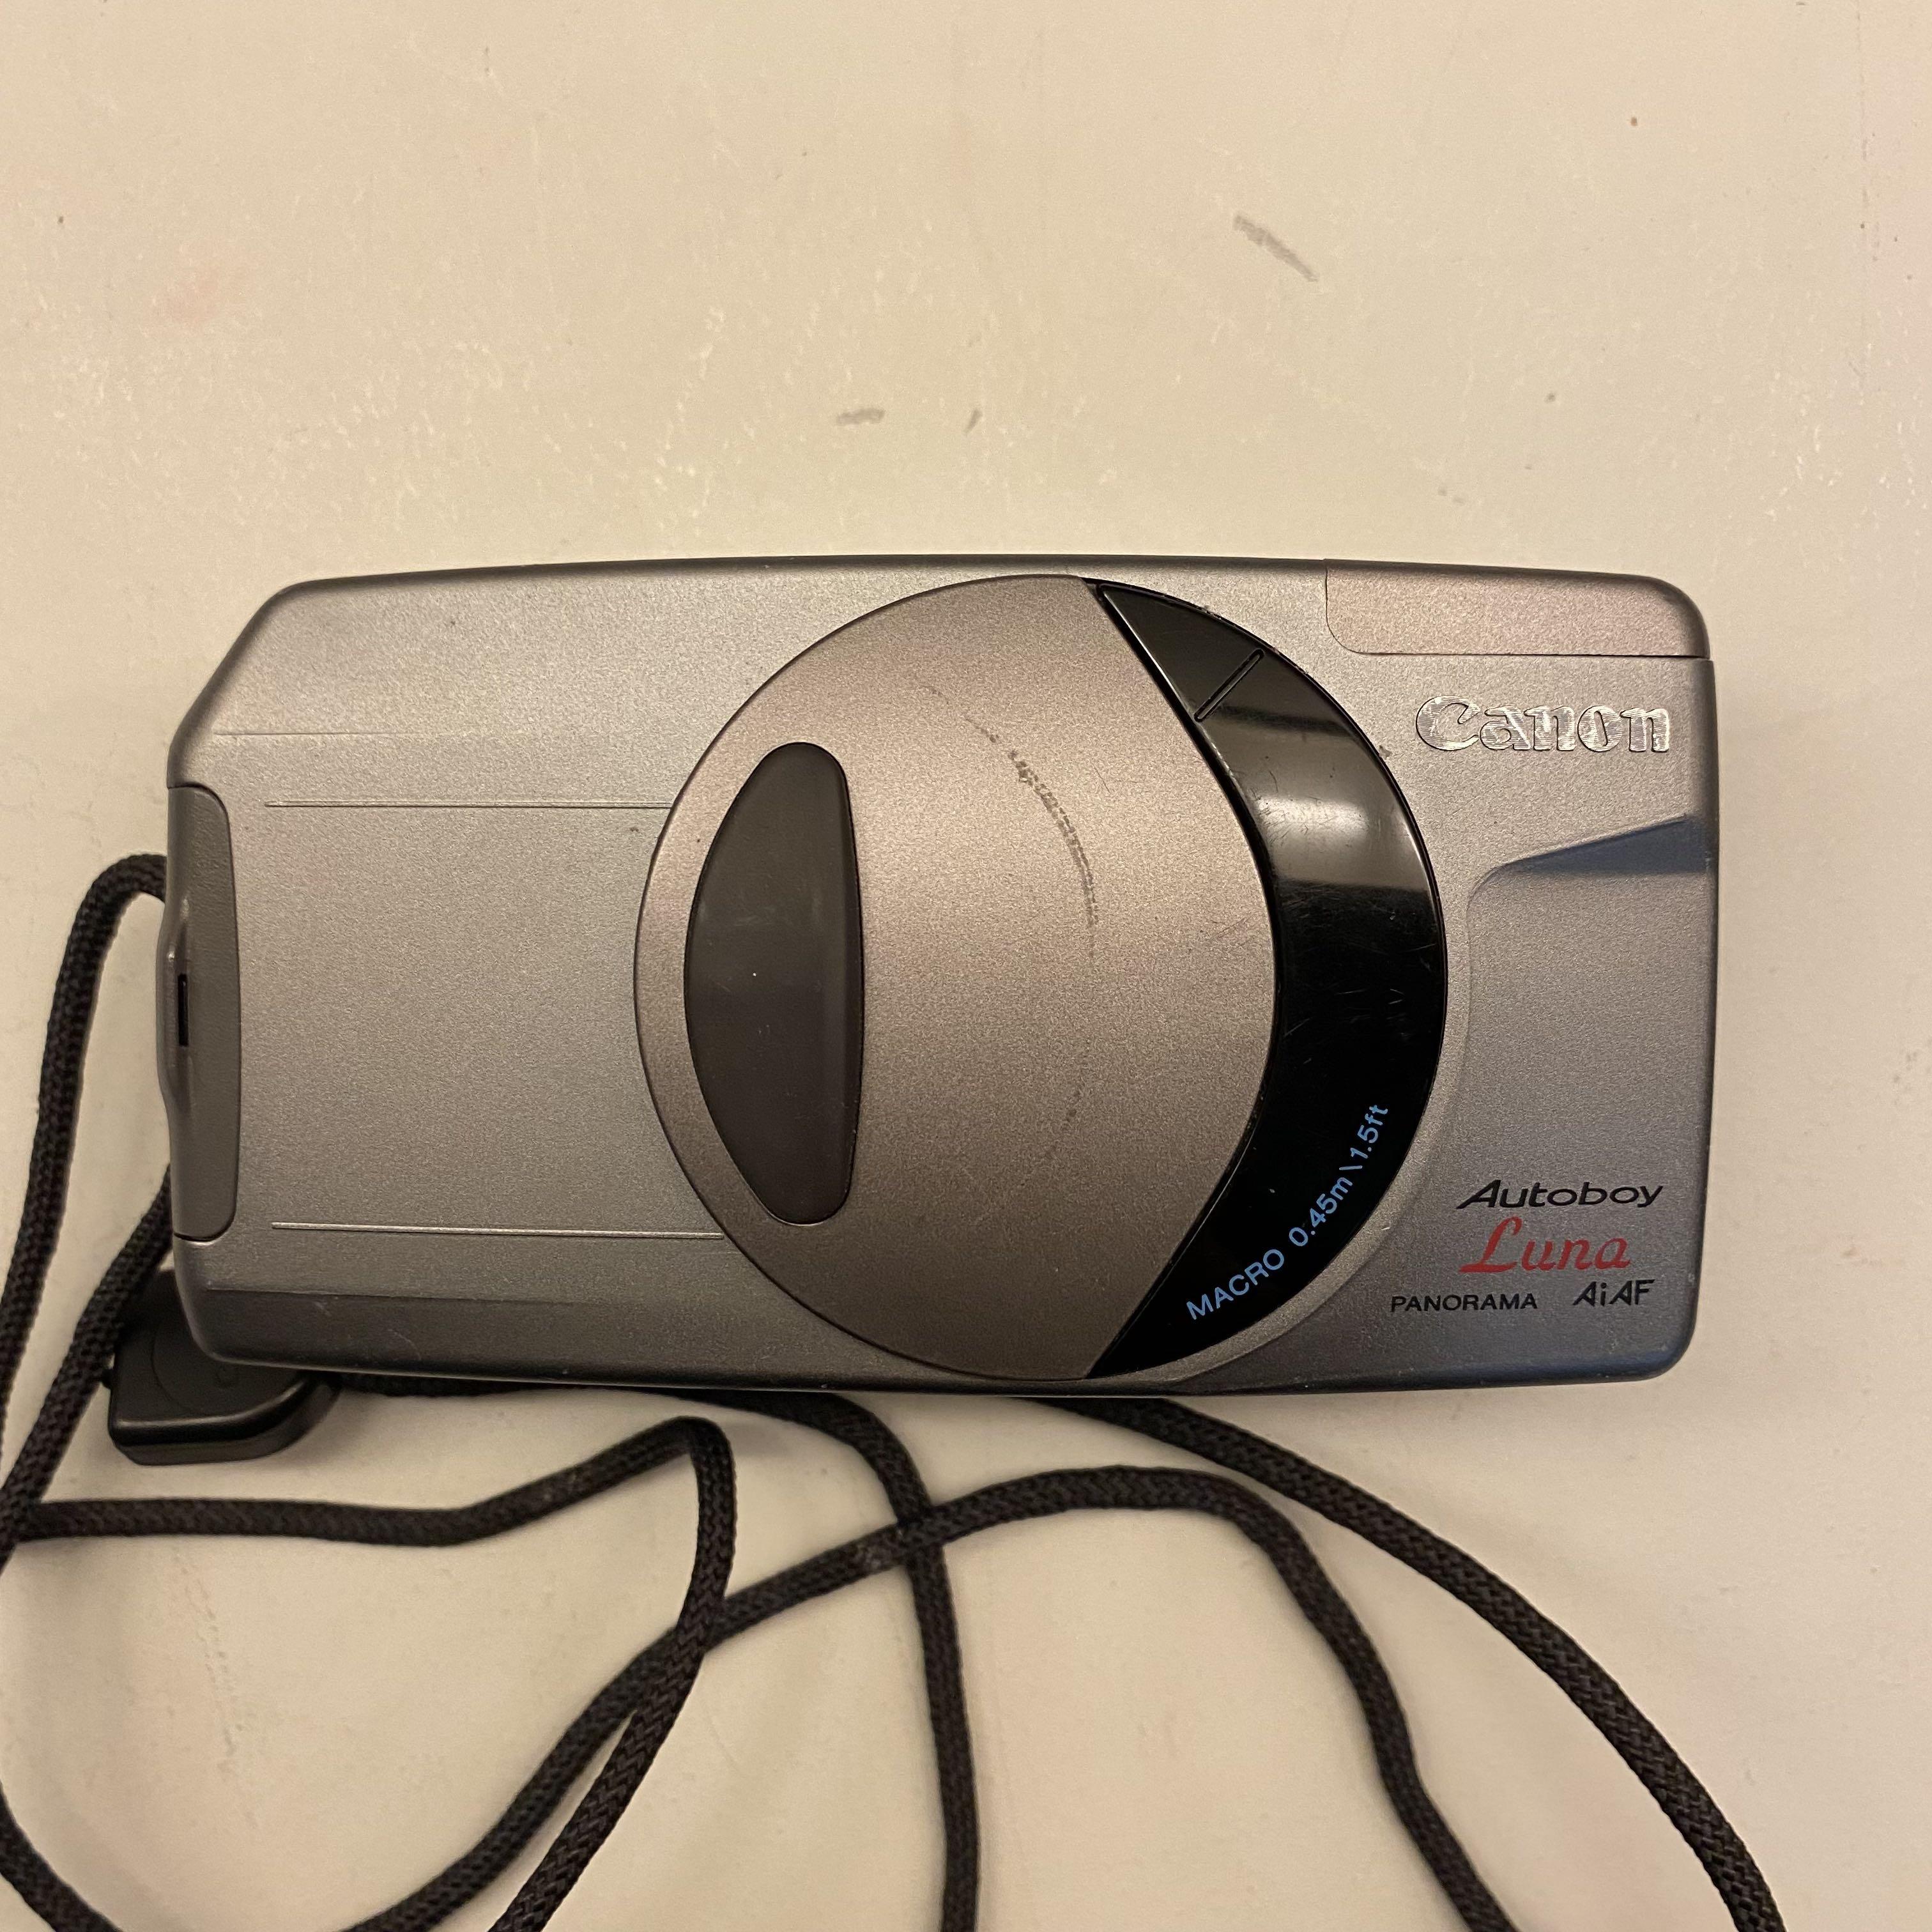 Canon Autoboy Luna Panorama Ai Af Point and Shoot Film Camera